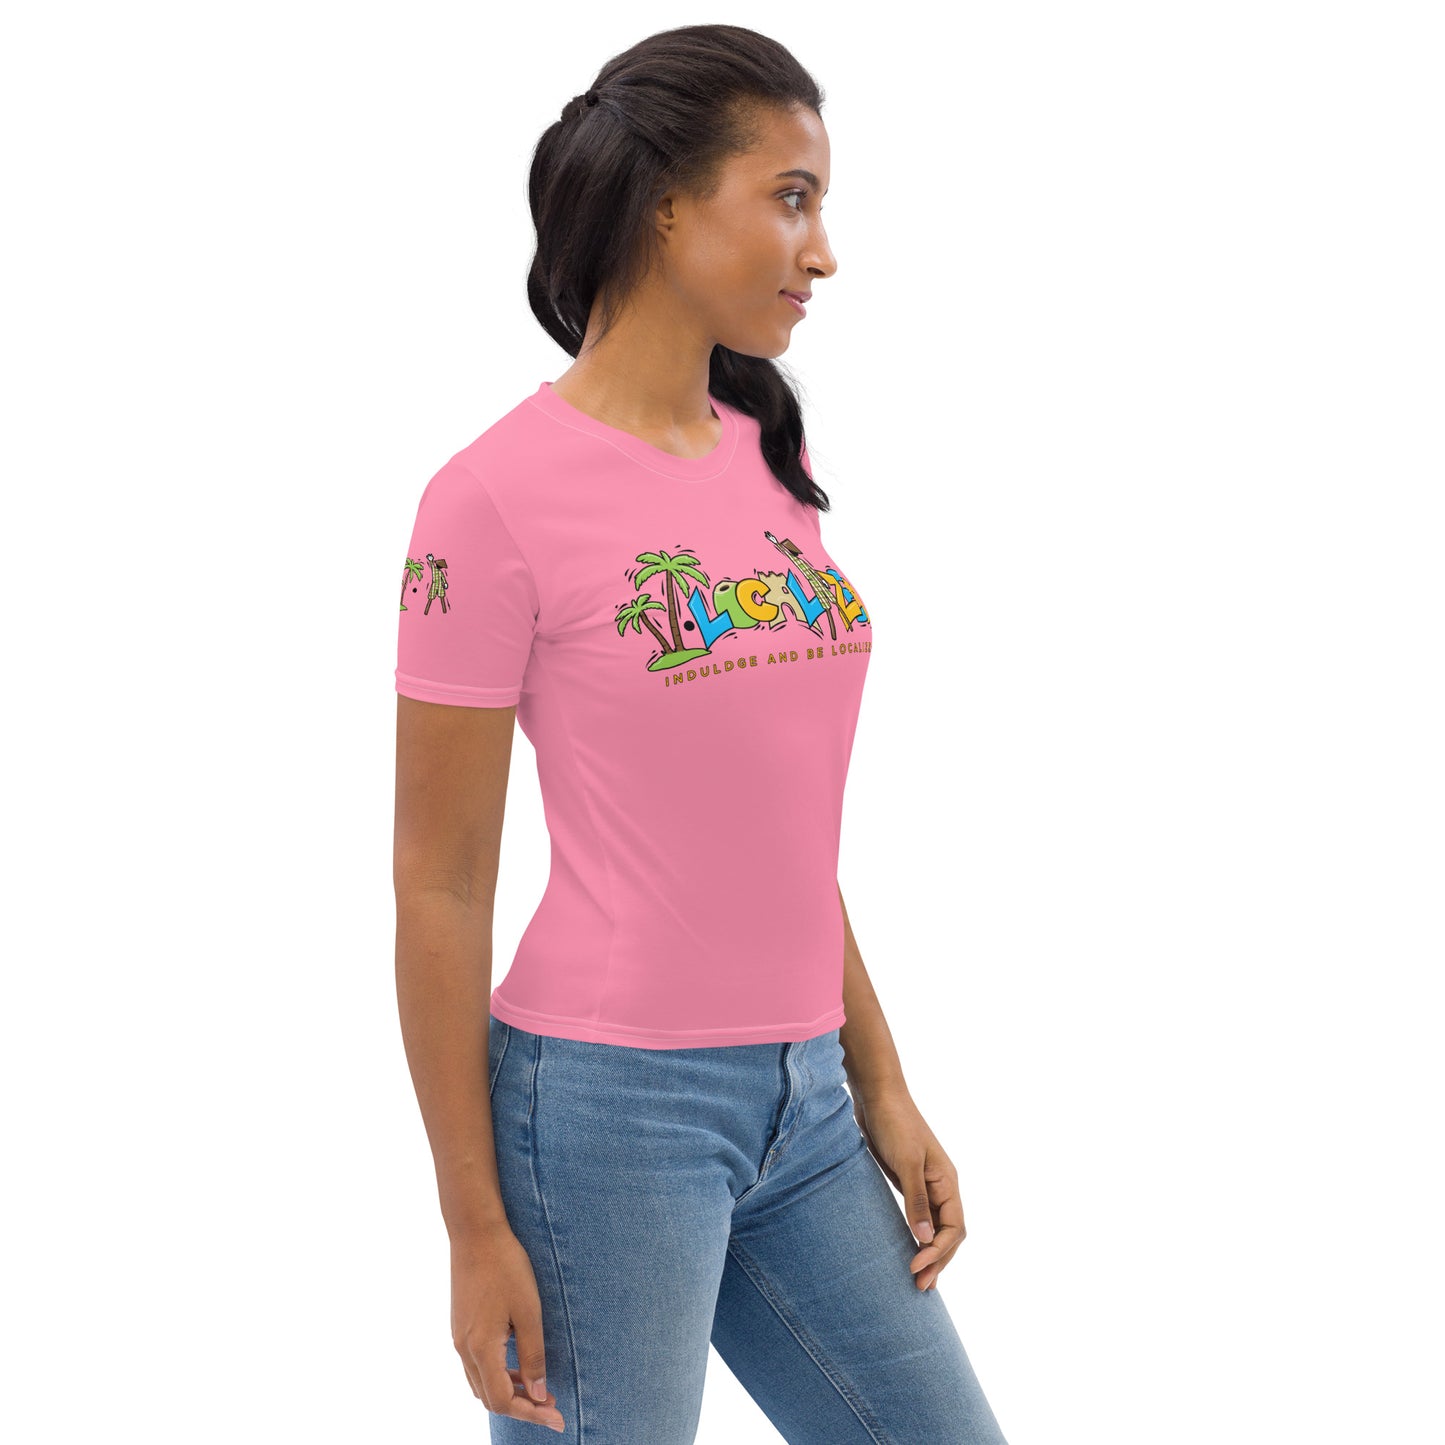 Pink V.Localized (Regular) Women’s Dry-Fit T-Shirt